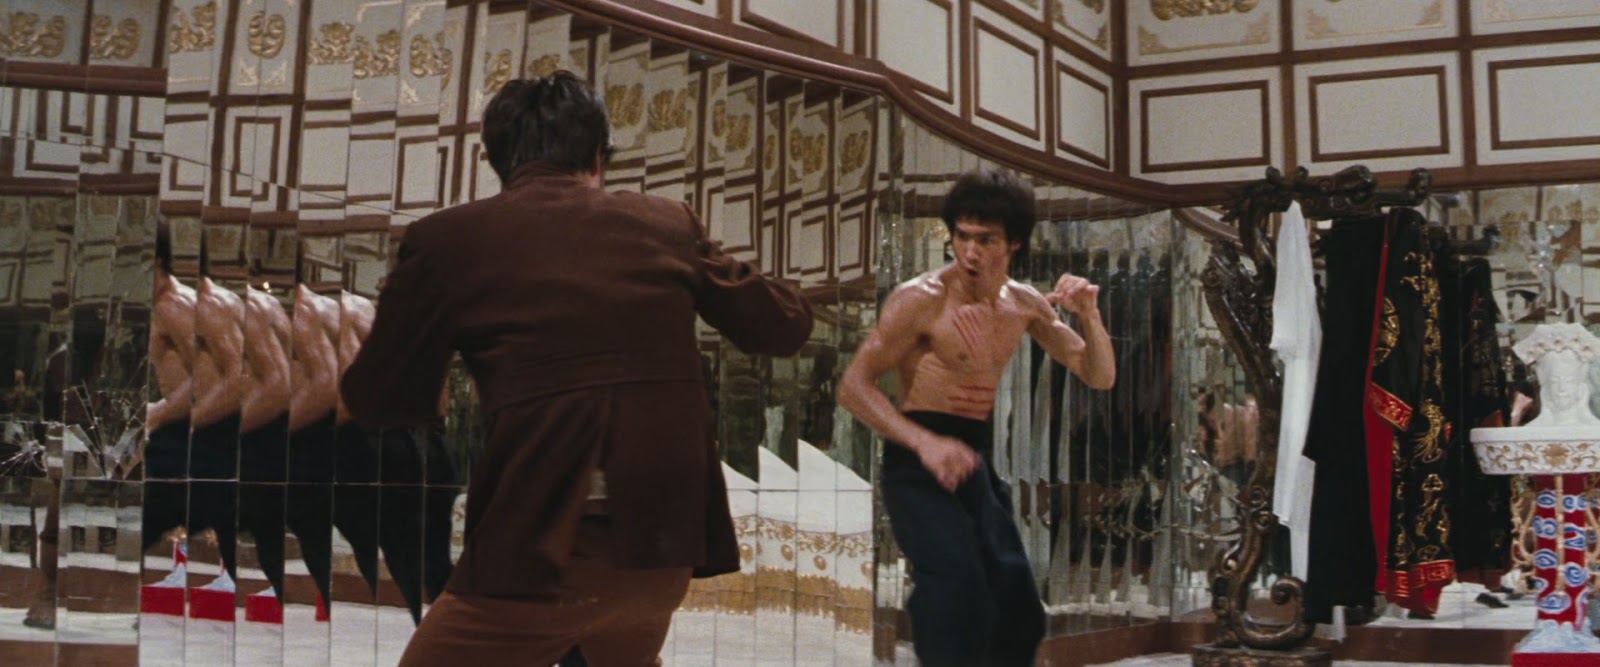 watch enter the dragon full movie online free youtube